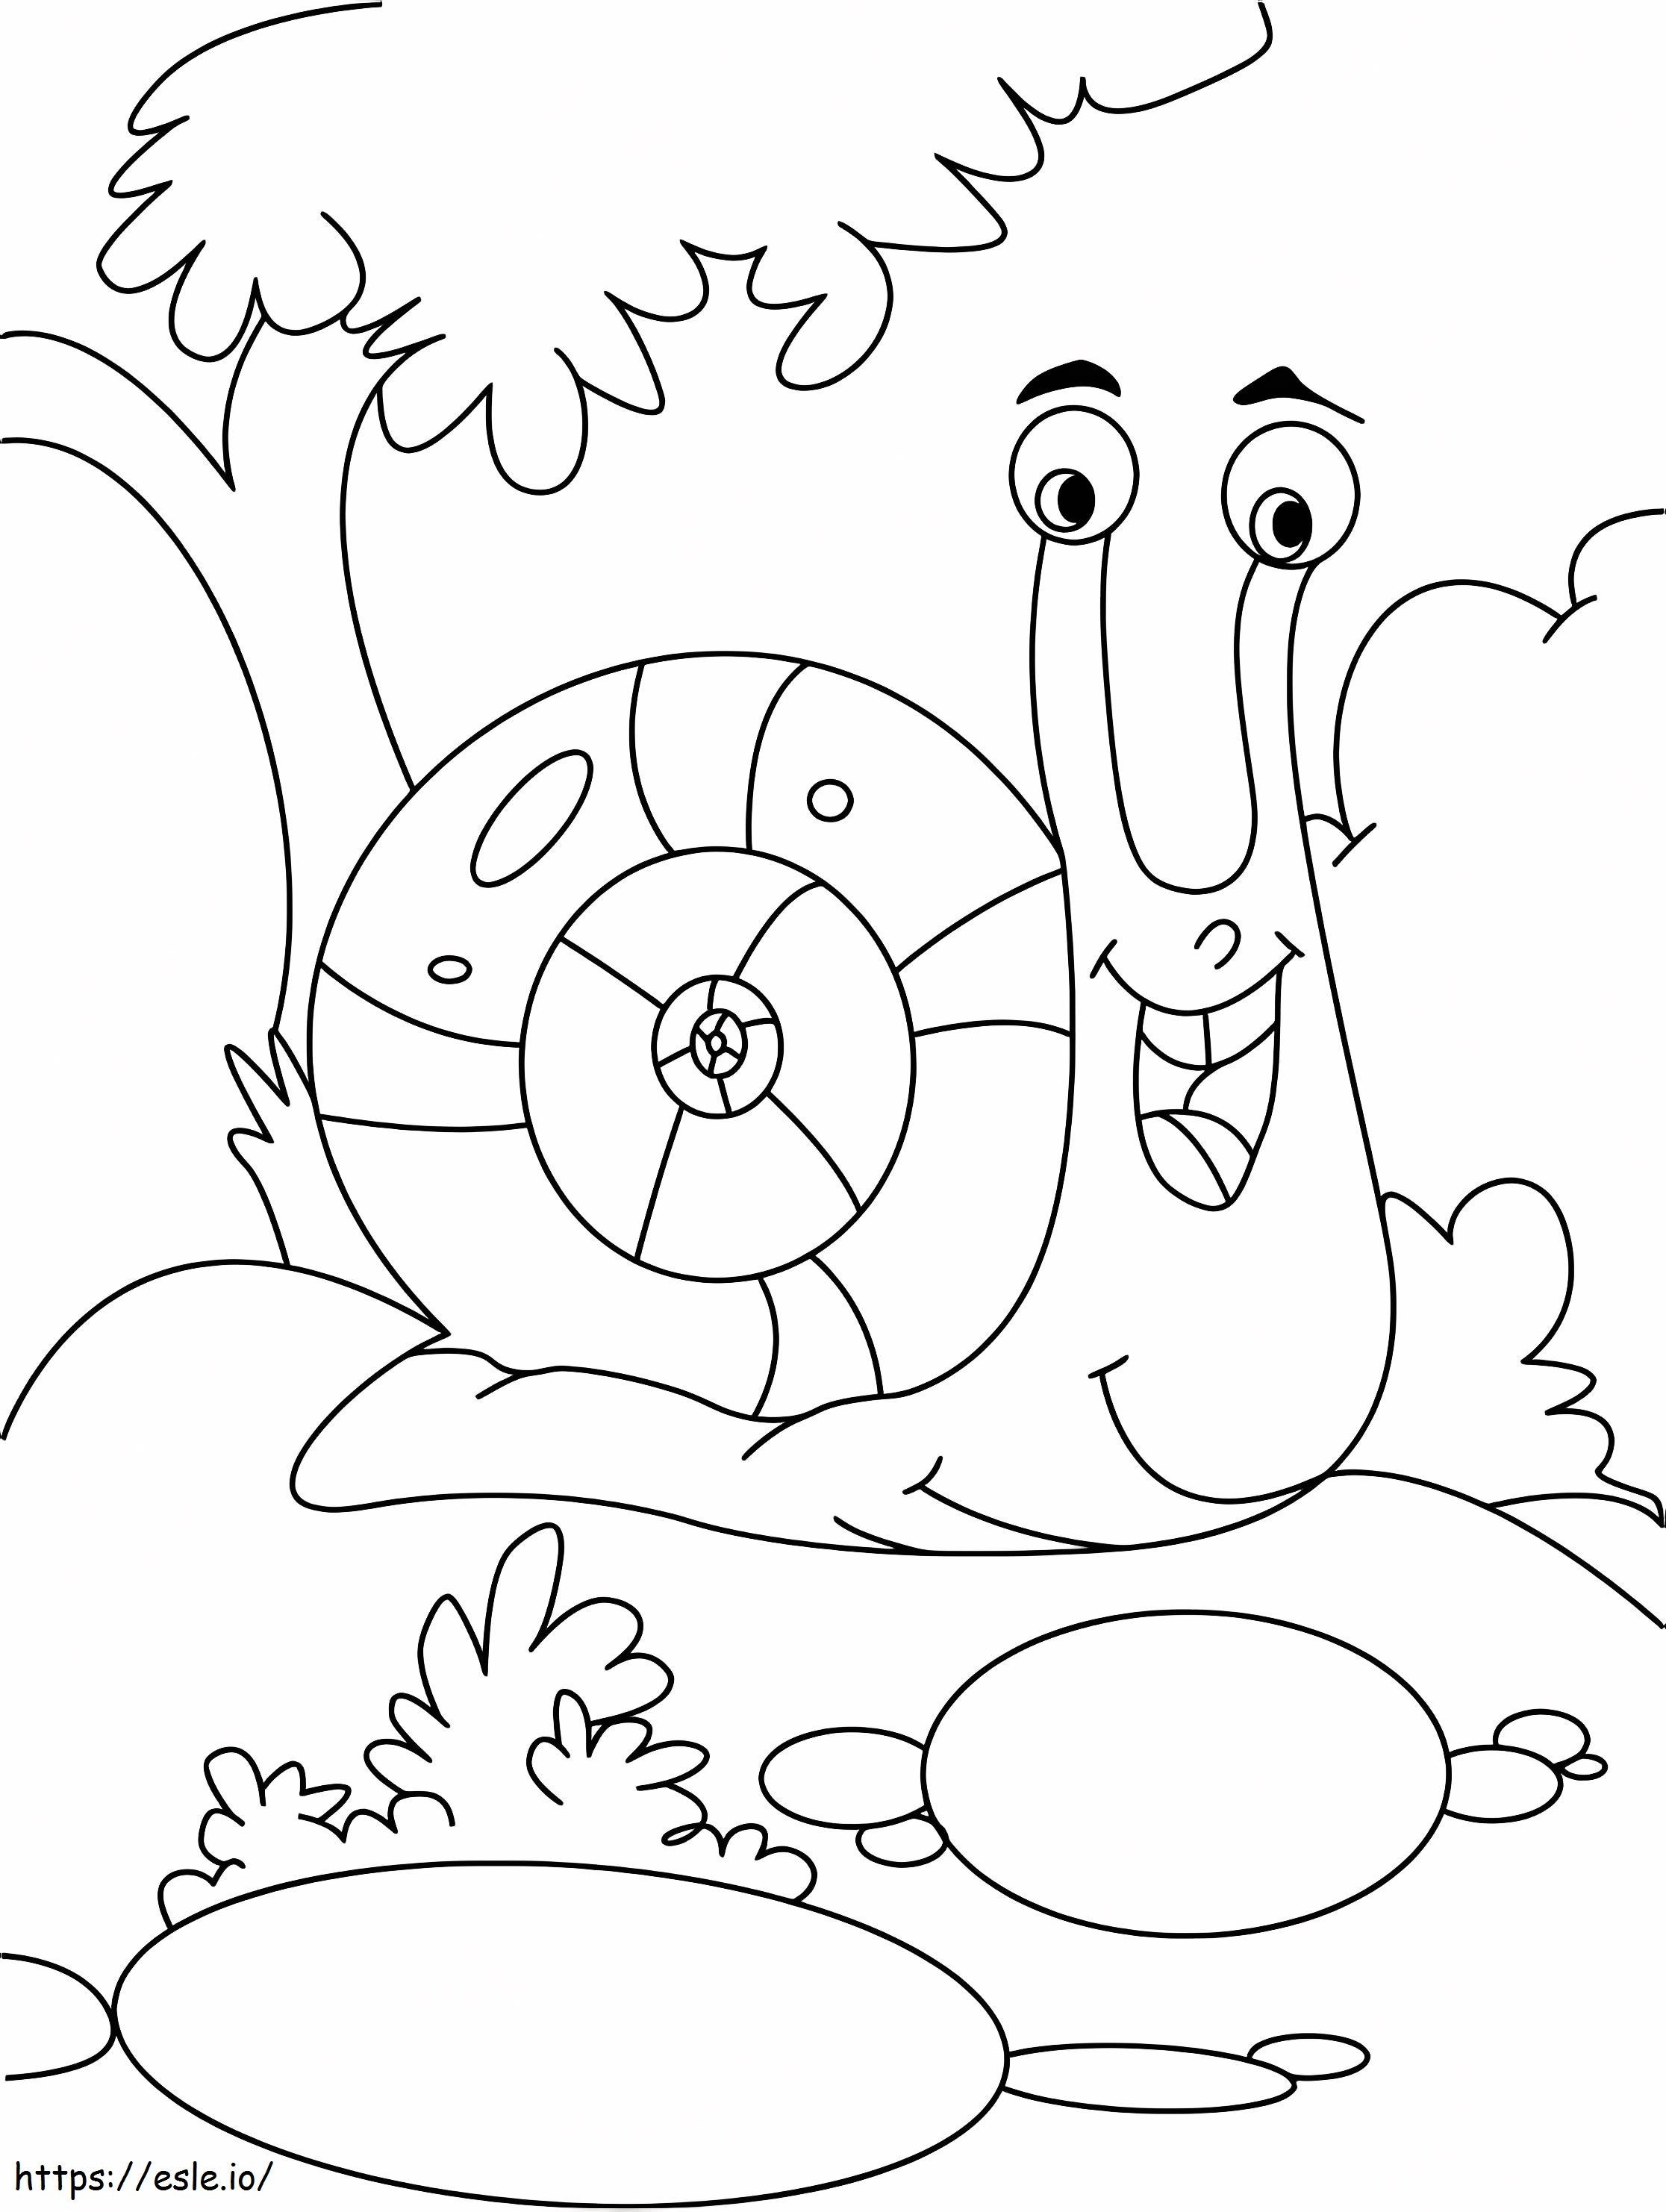 Glittery Snail coloring page